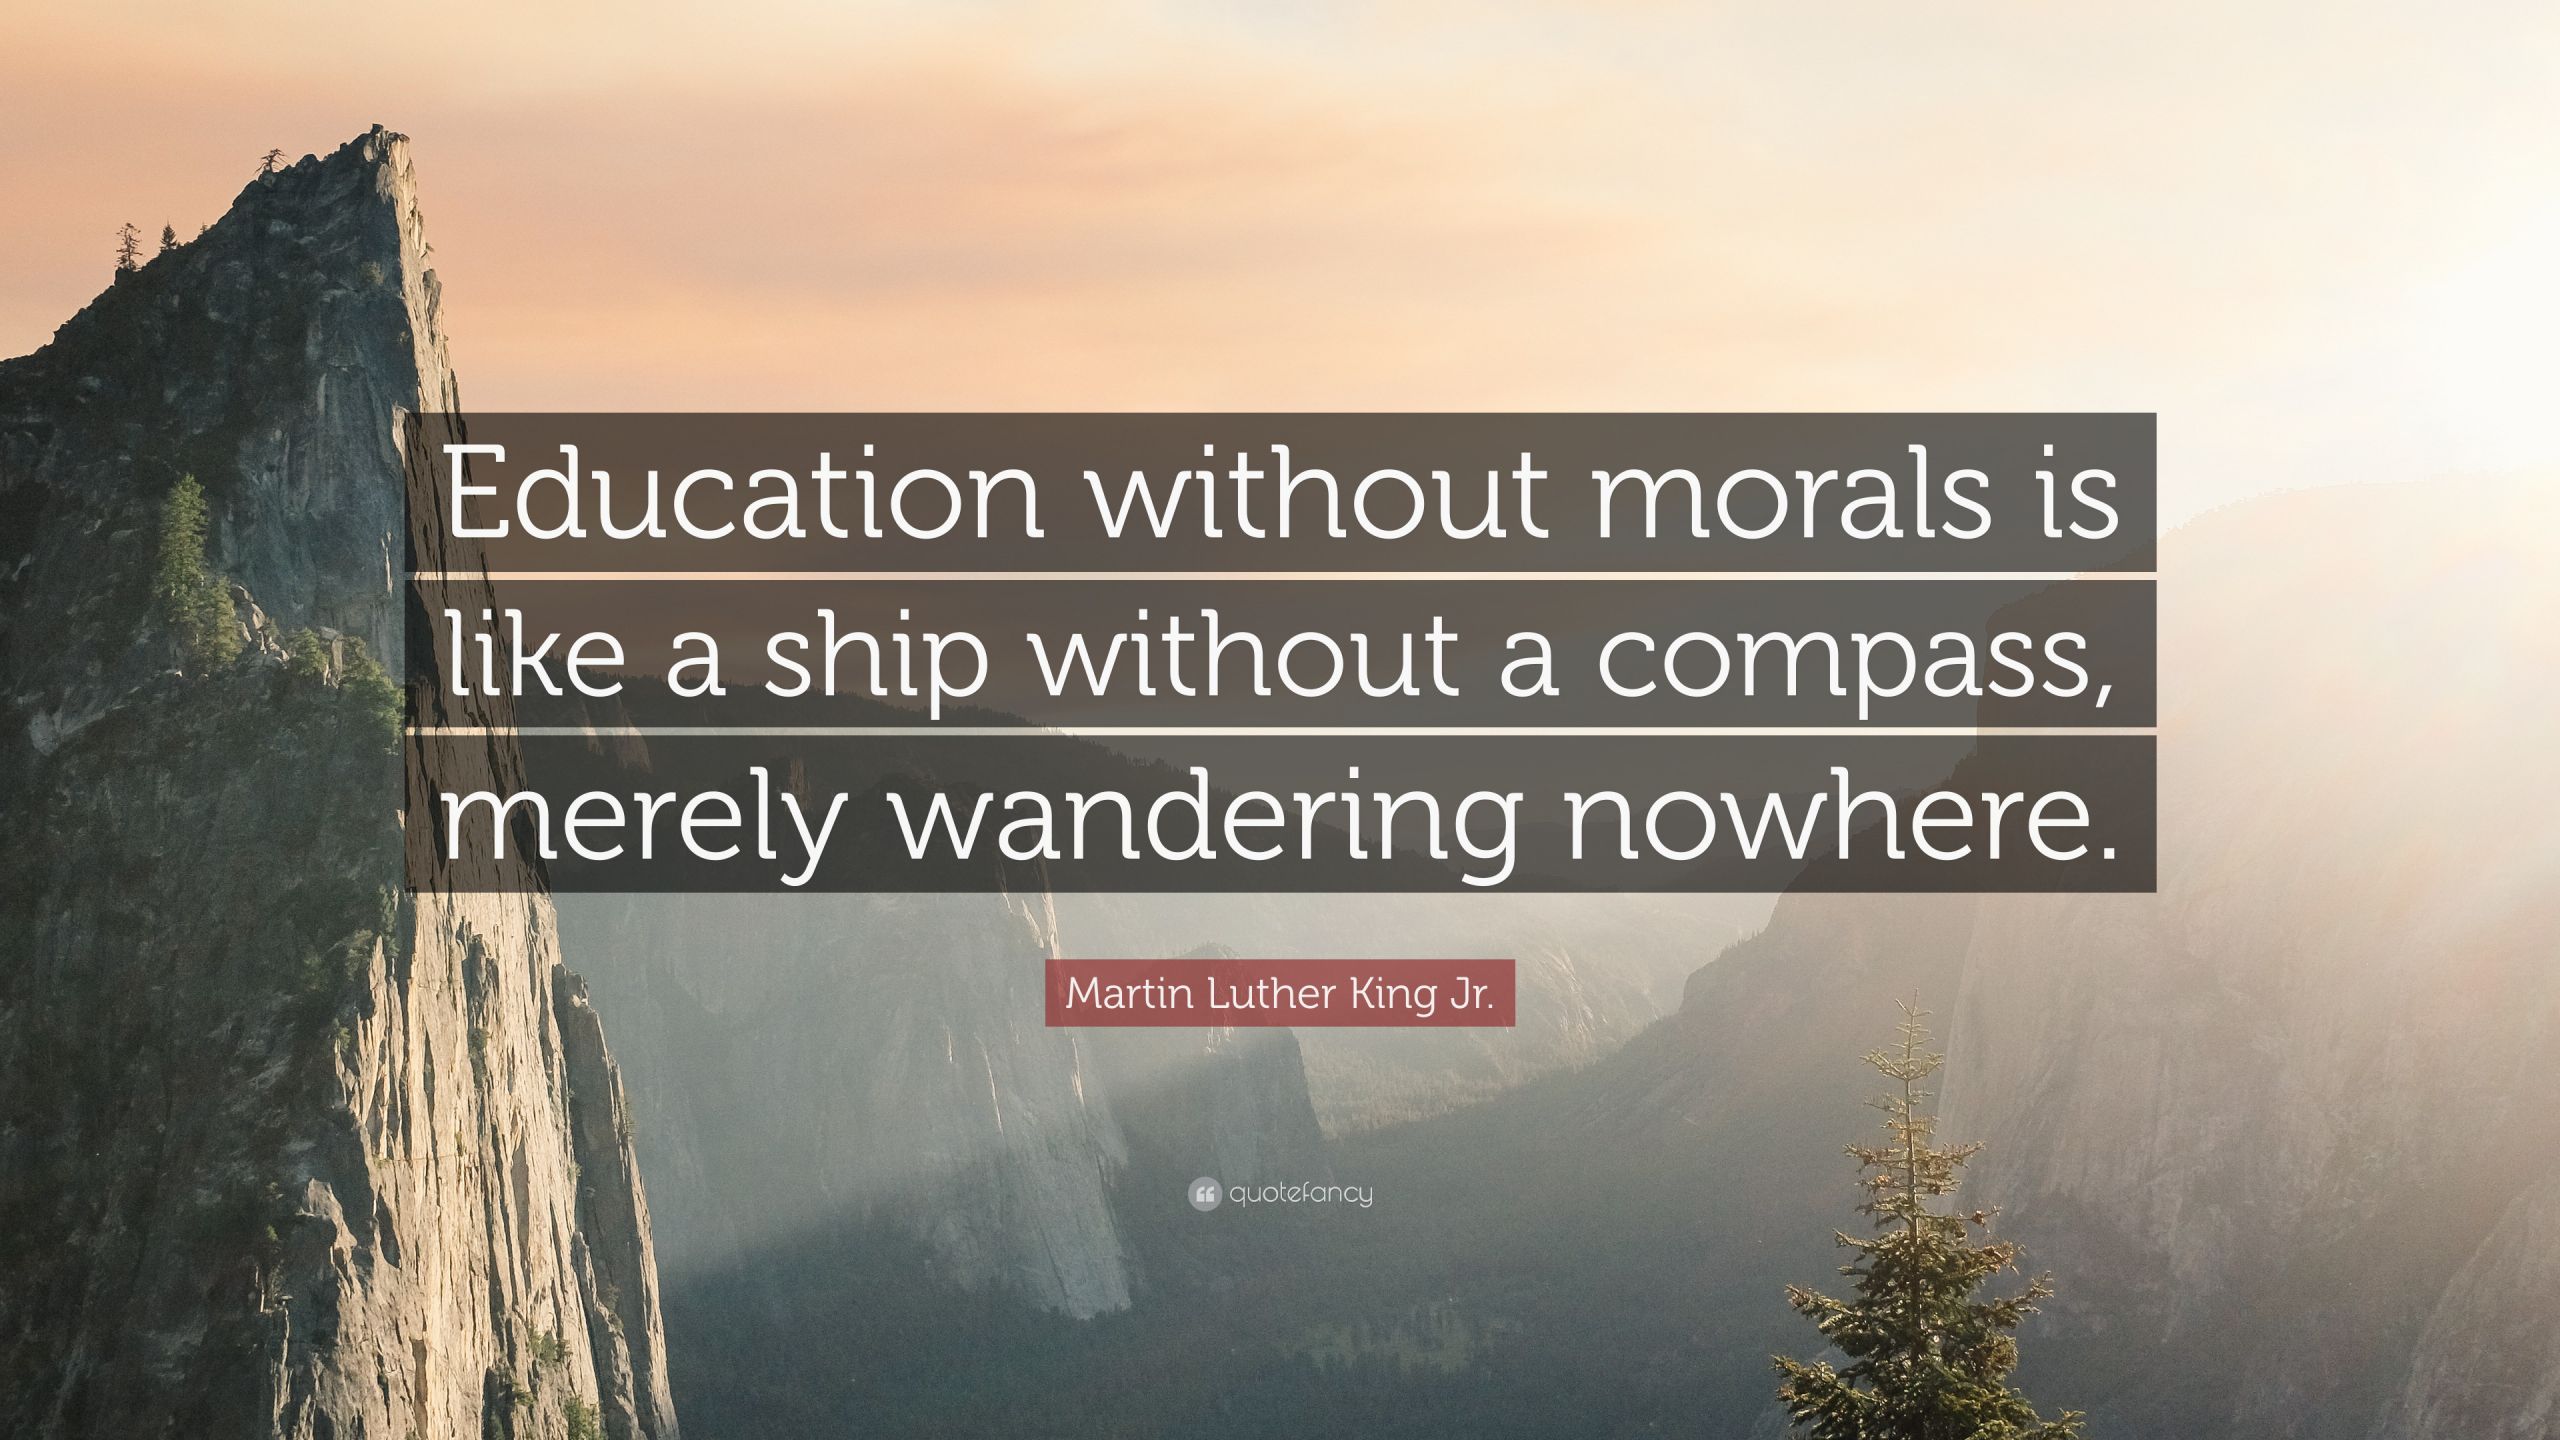 Martin Luther King Education Quote
 Martin Luther King Jr Quote “Education without morals is